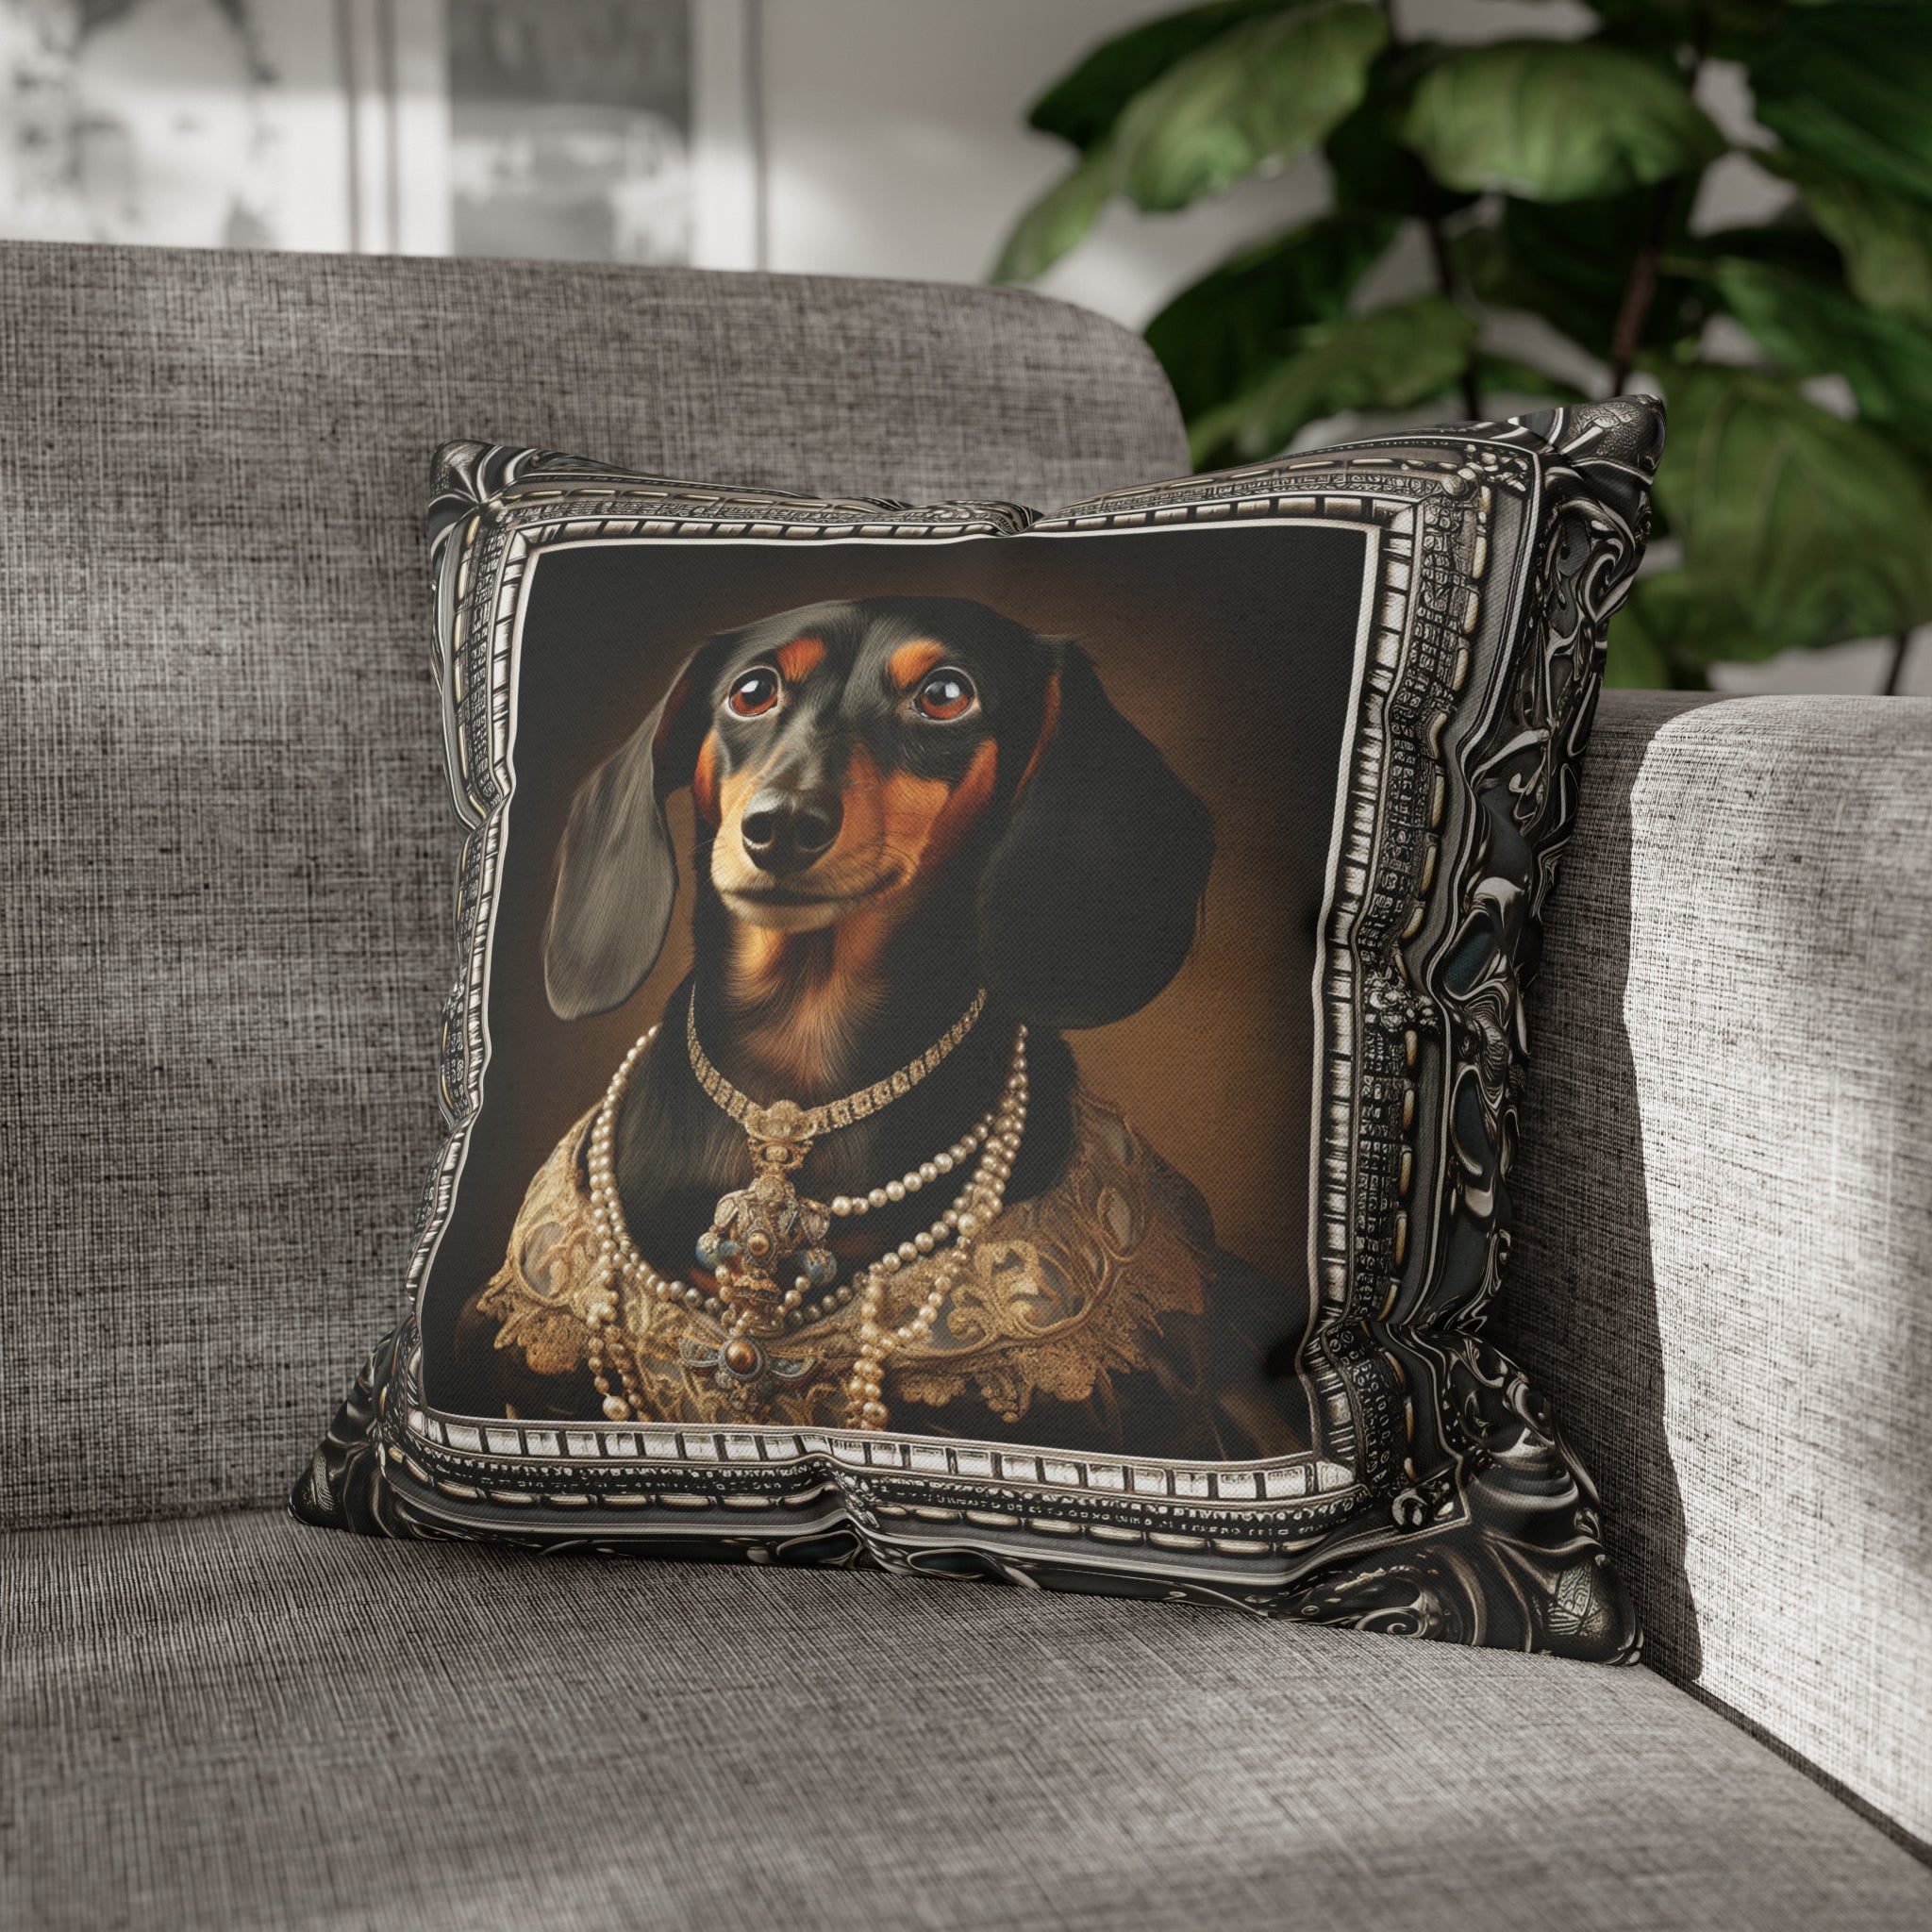 Square Pillow Case 18" x 18", CASE ONLY, no pillow form, original Art ,a Beautiful Painting of a Dachshund in a silver frame.